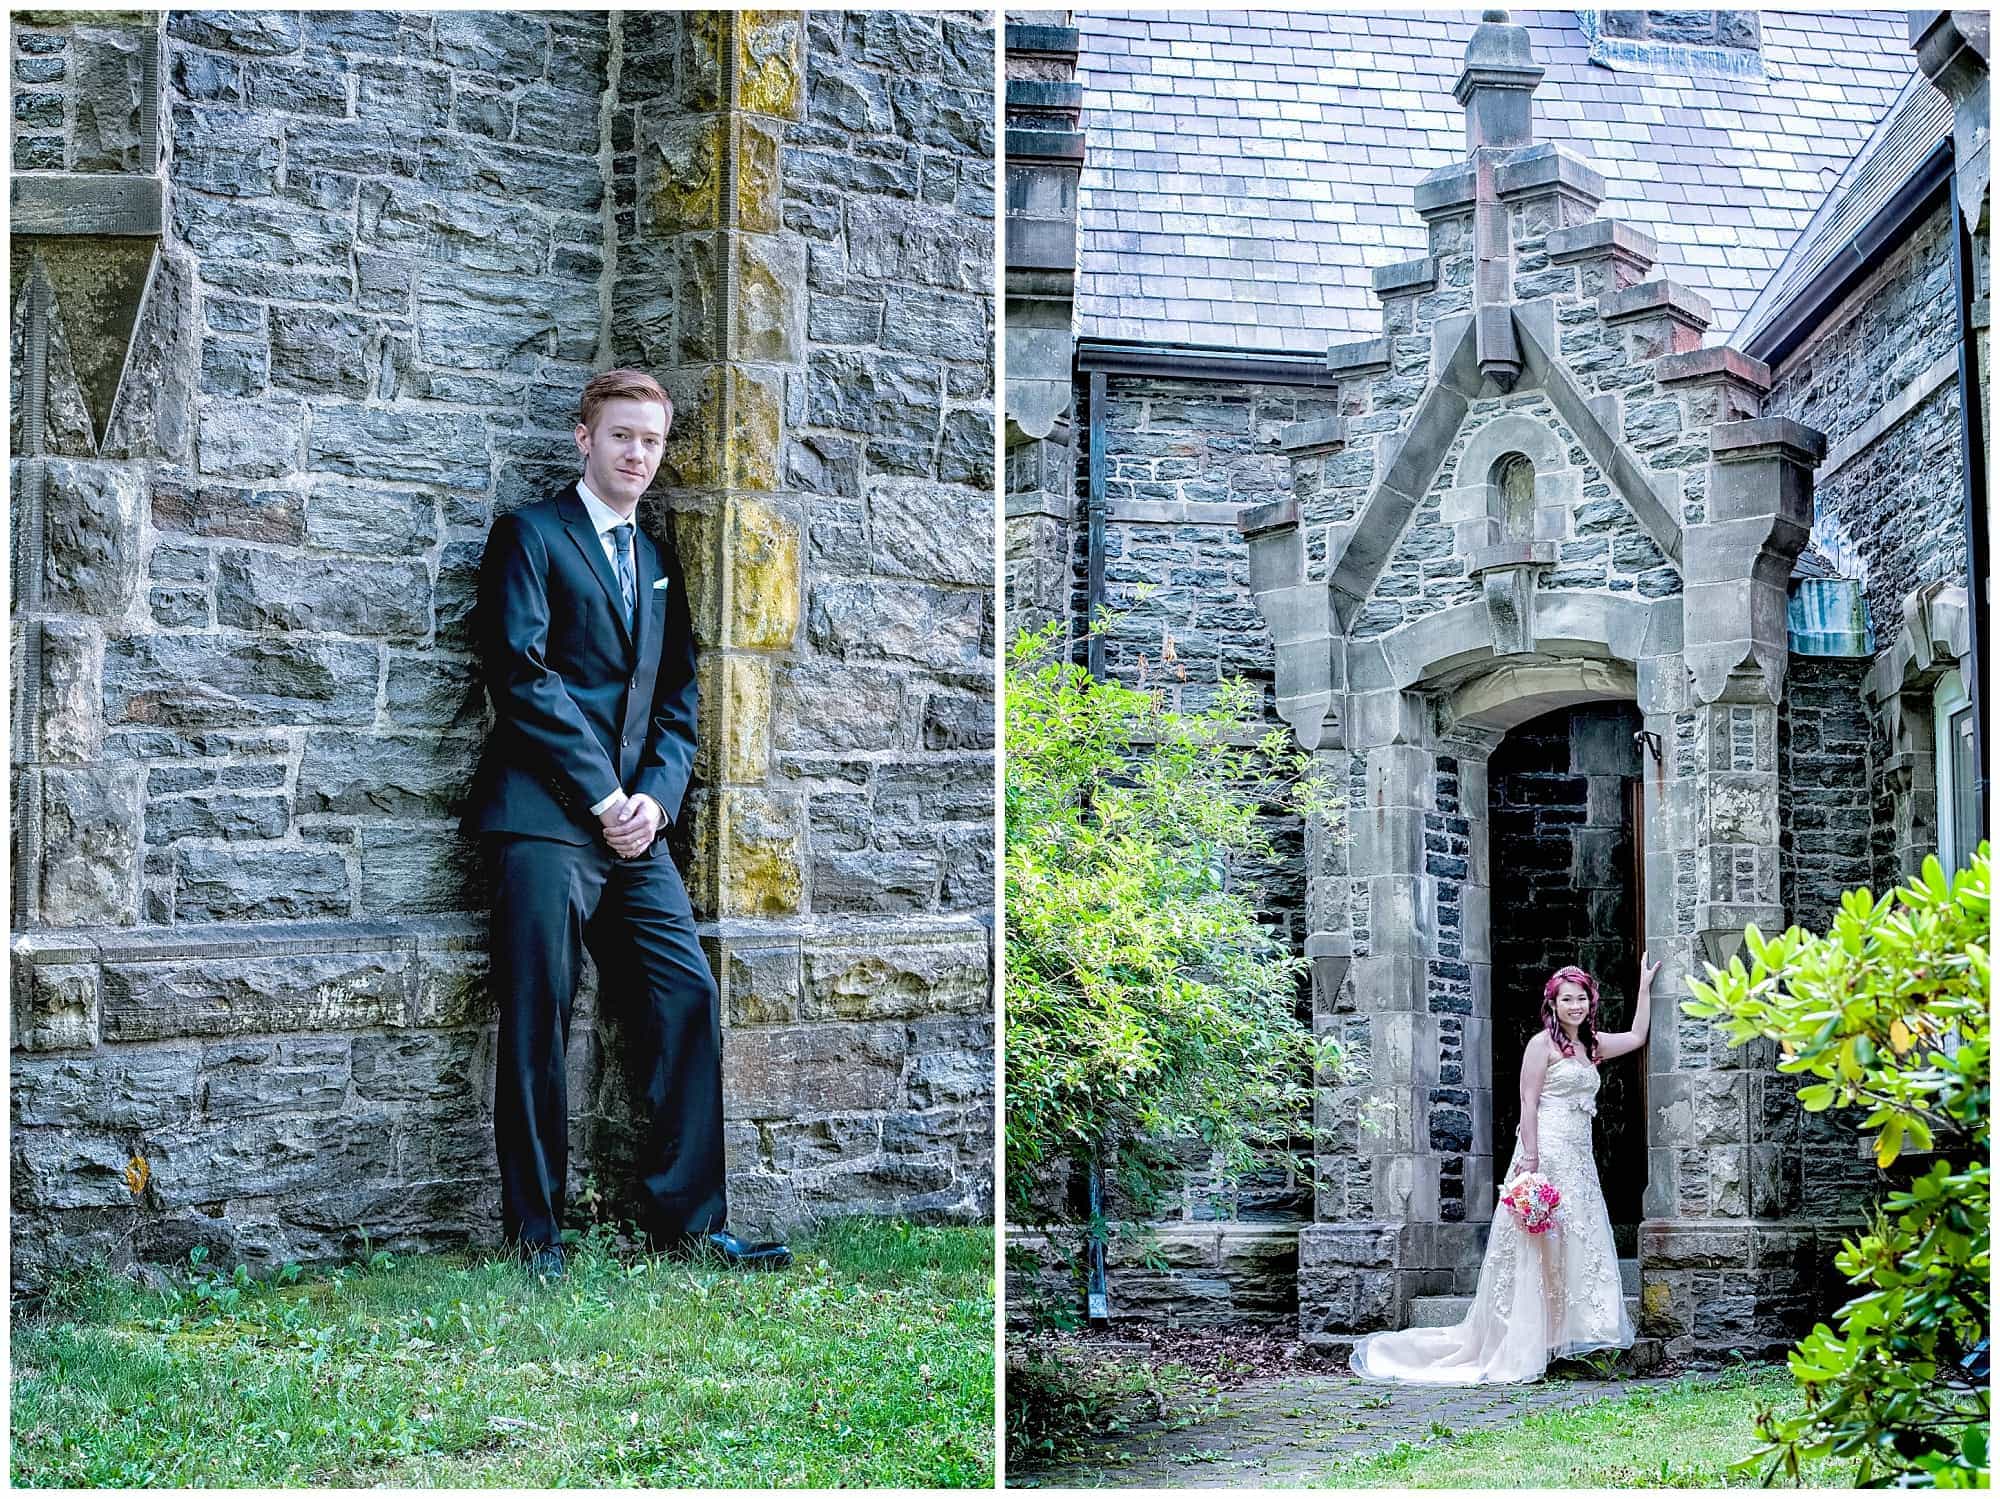 The bride and groom had their wedding photos done at the Gatehouse in Point Pleasant Park in Halifax, NS.